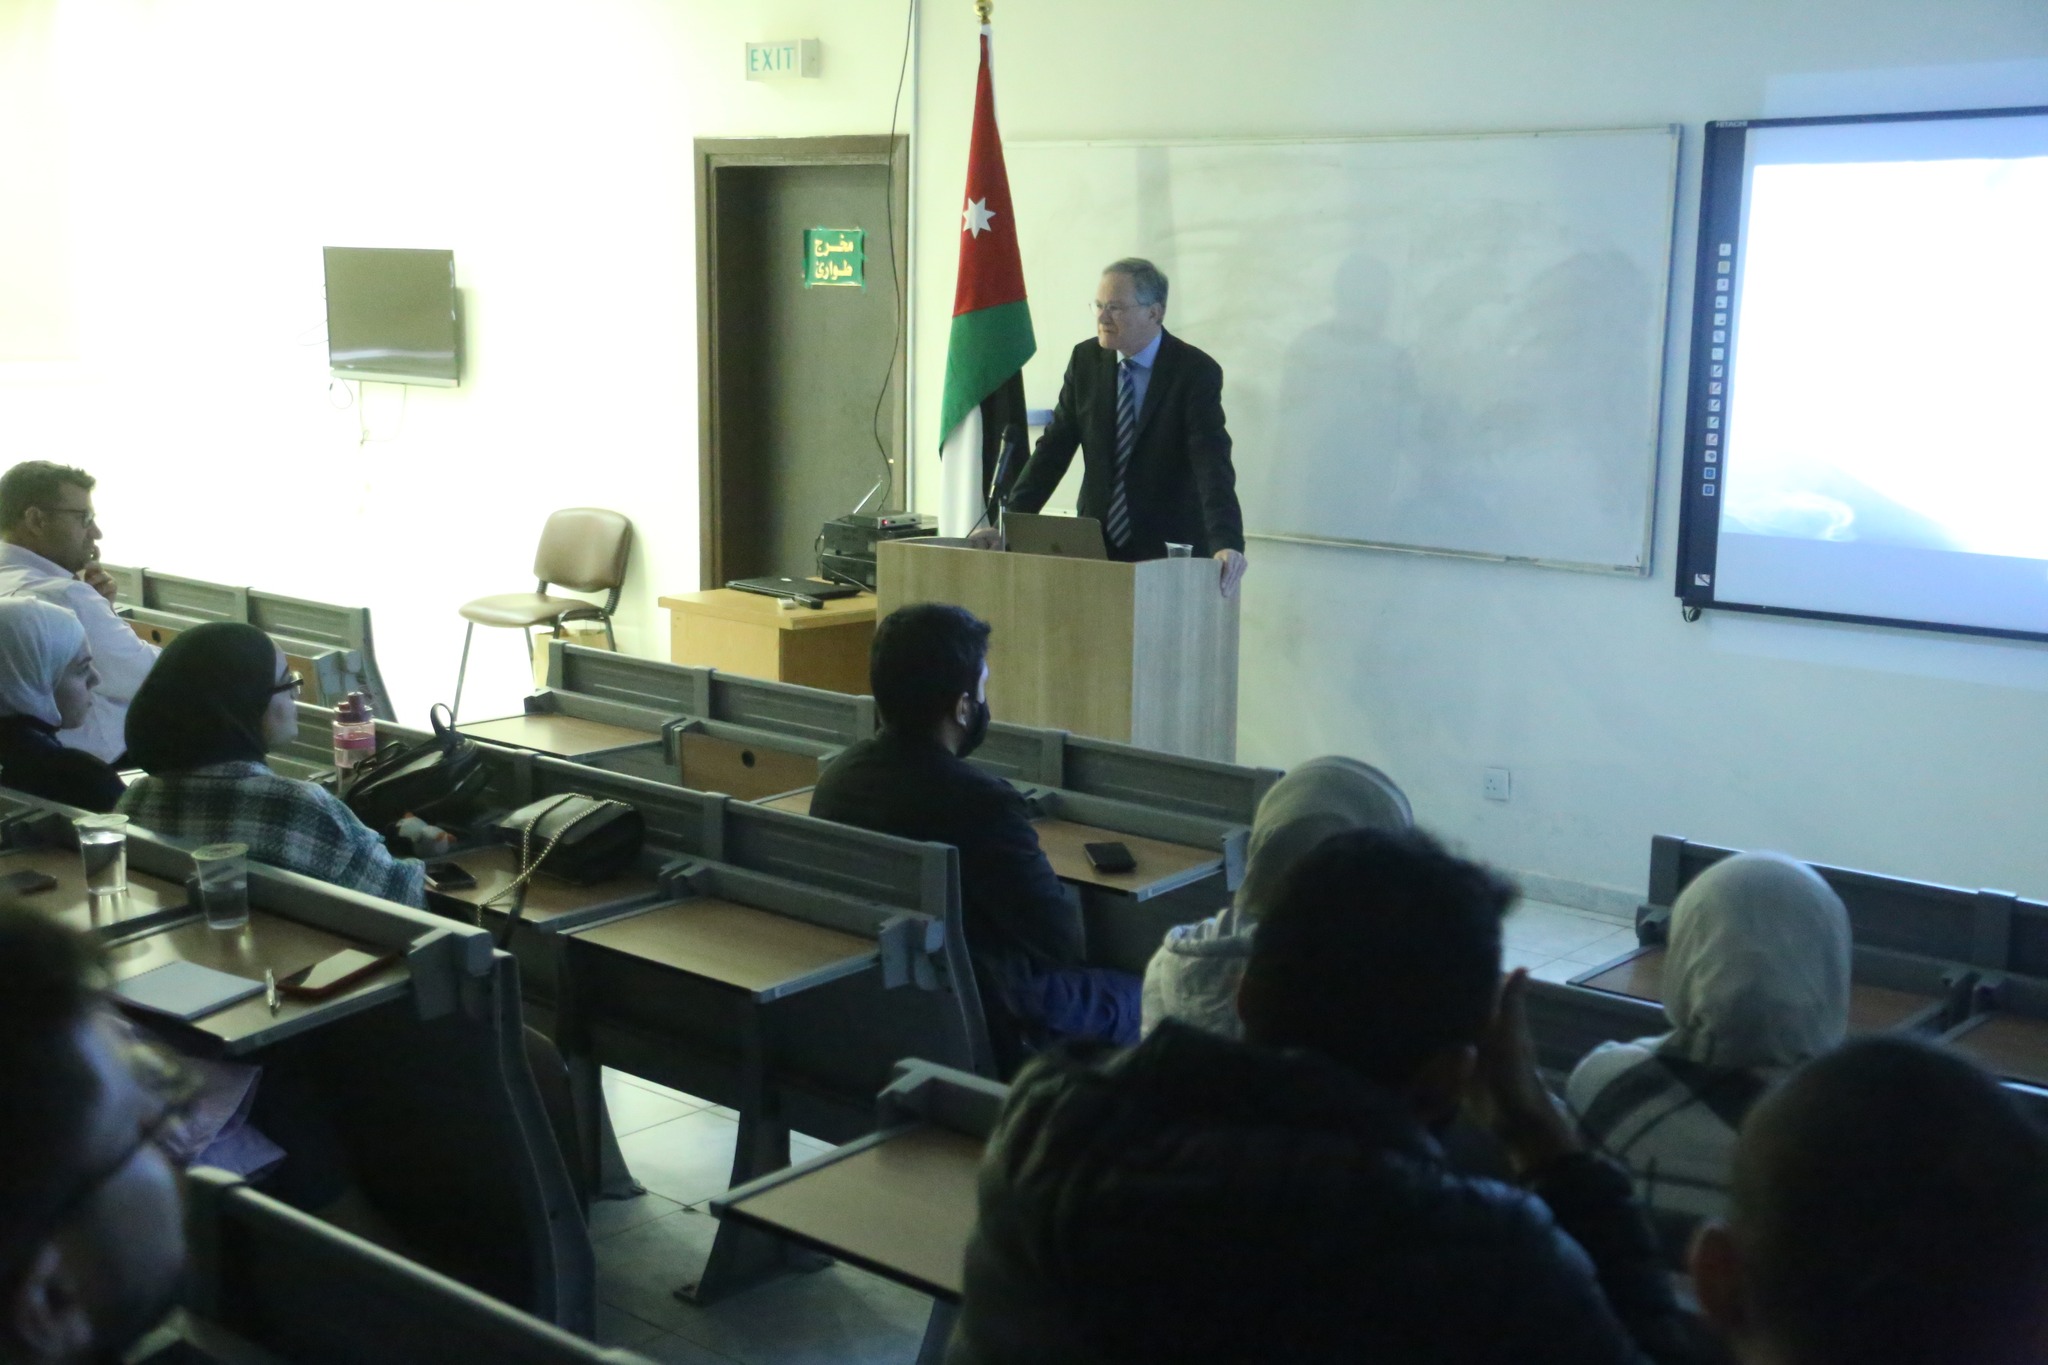 Prof. Andrea lecture 4.jpg